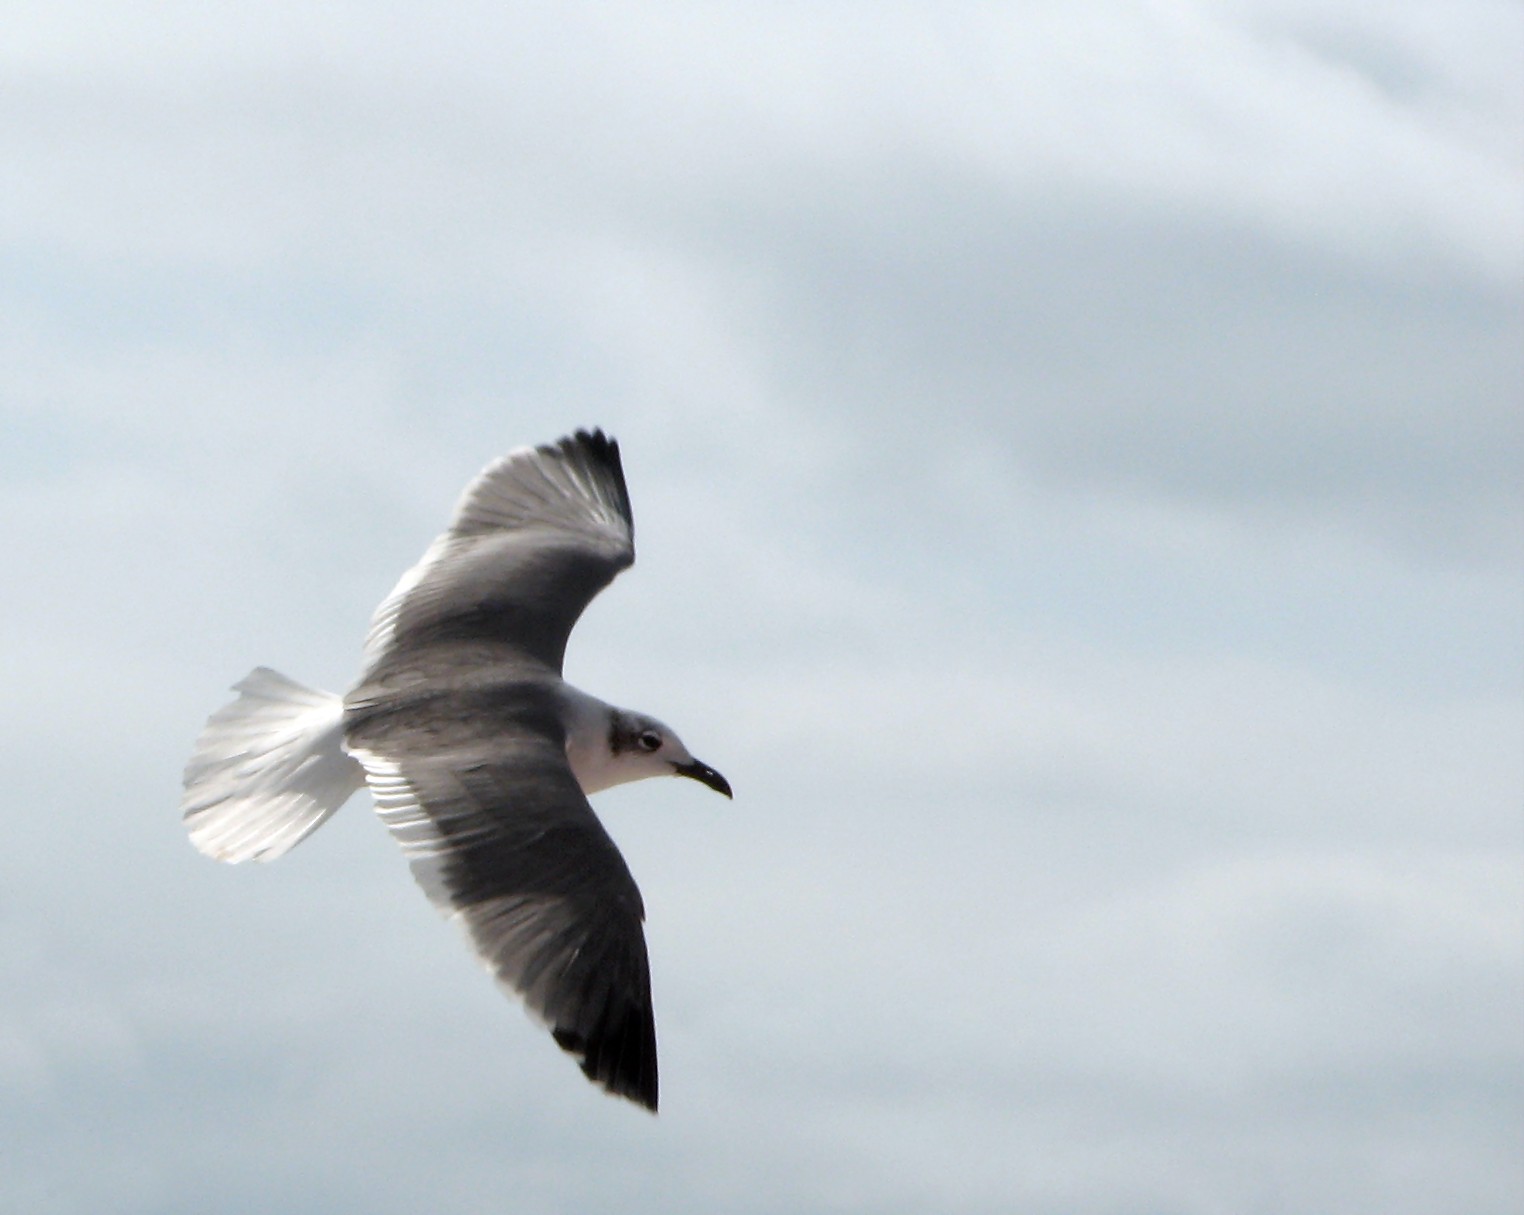 Close-up of a seagull flying photo